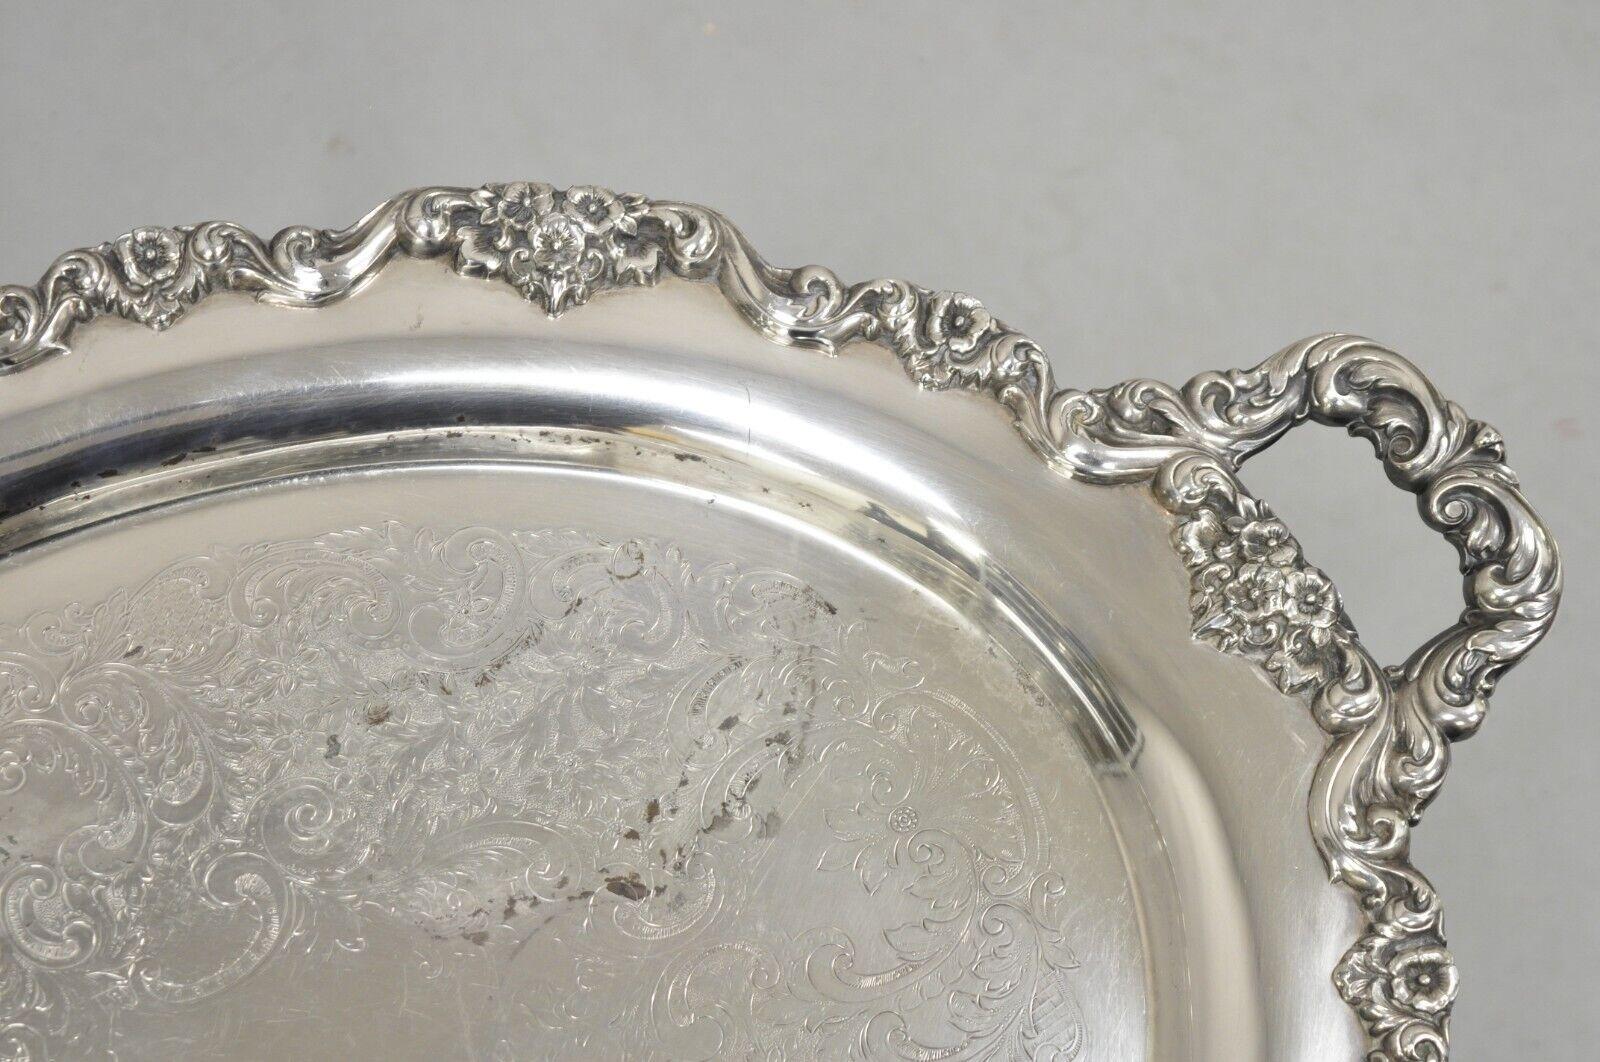 EPCA Poole Silver Co 400 Lancaster Rose Large Silver Plated Serving Platter Tray In Good Condition For Sale In Philadelphia, PA